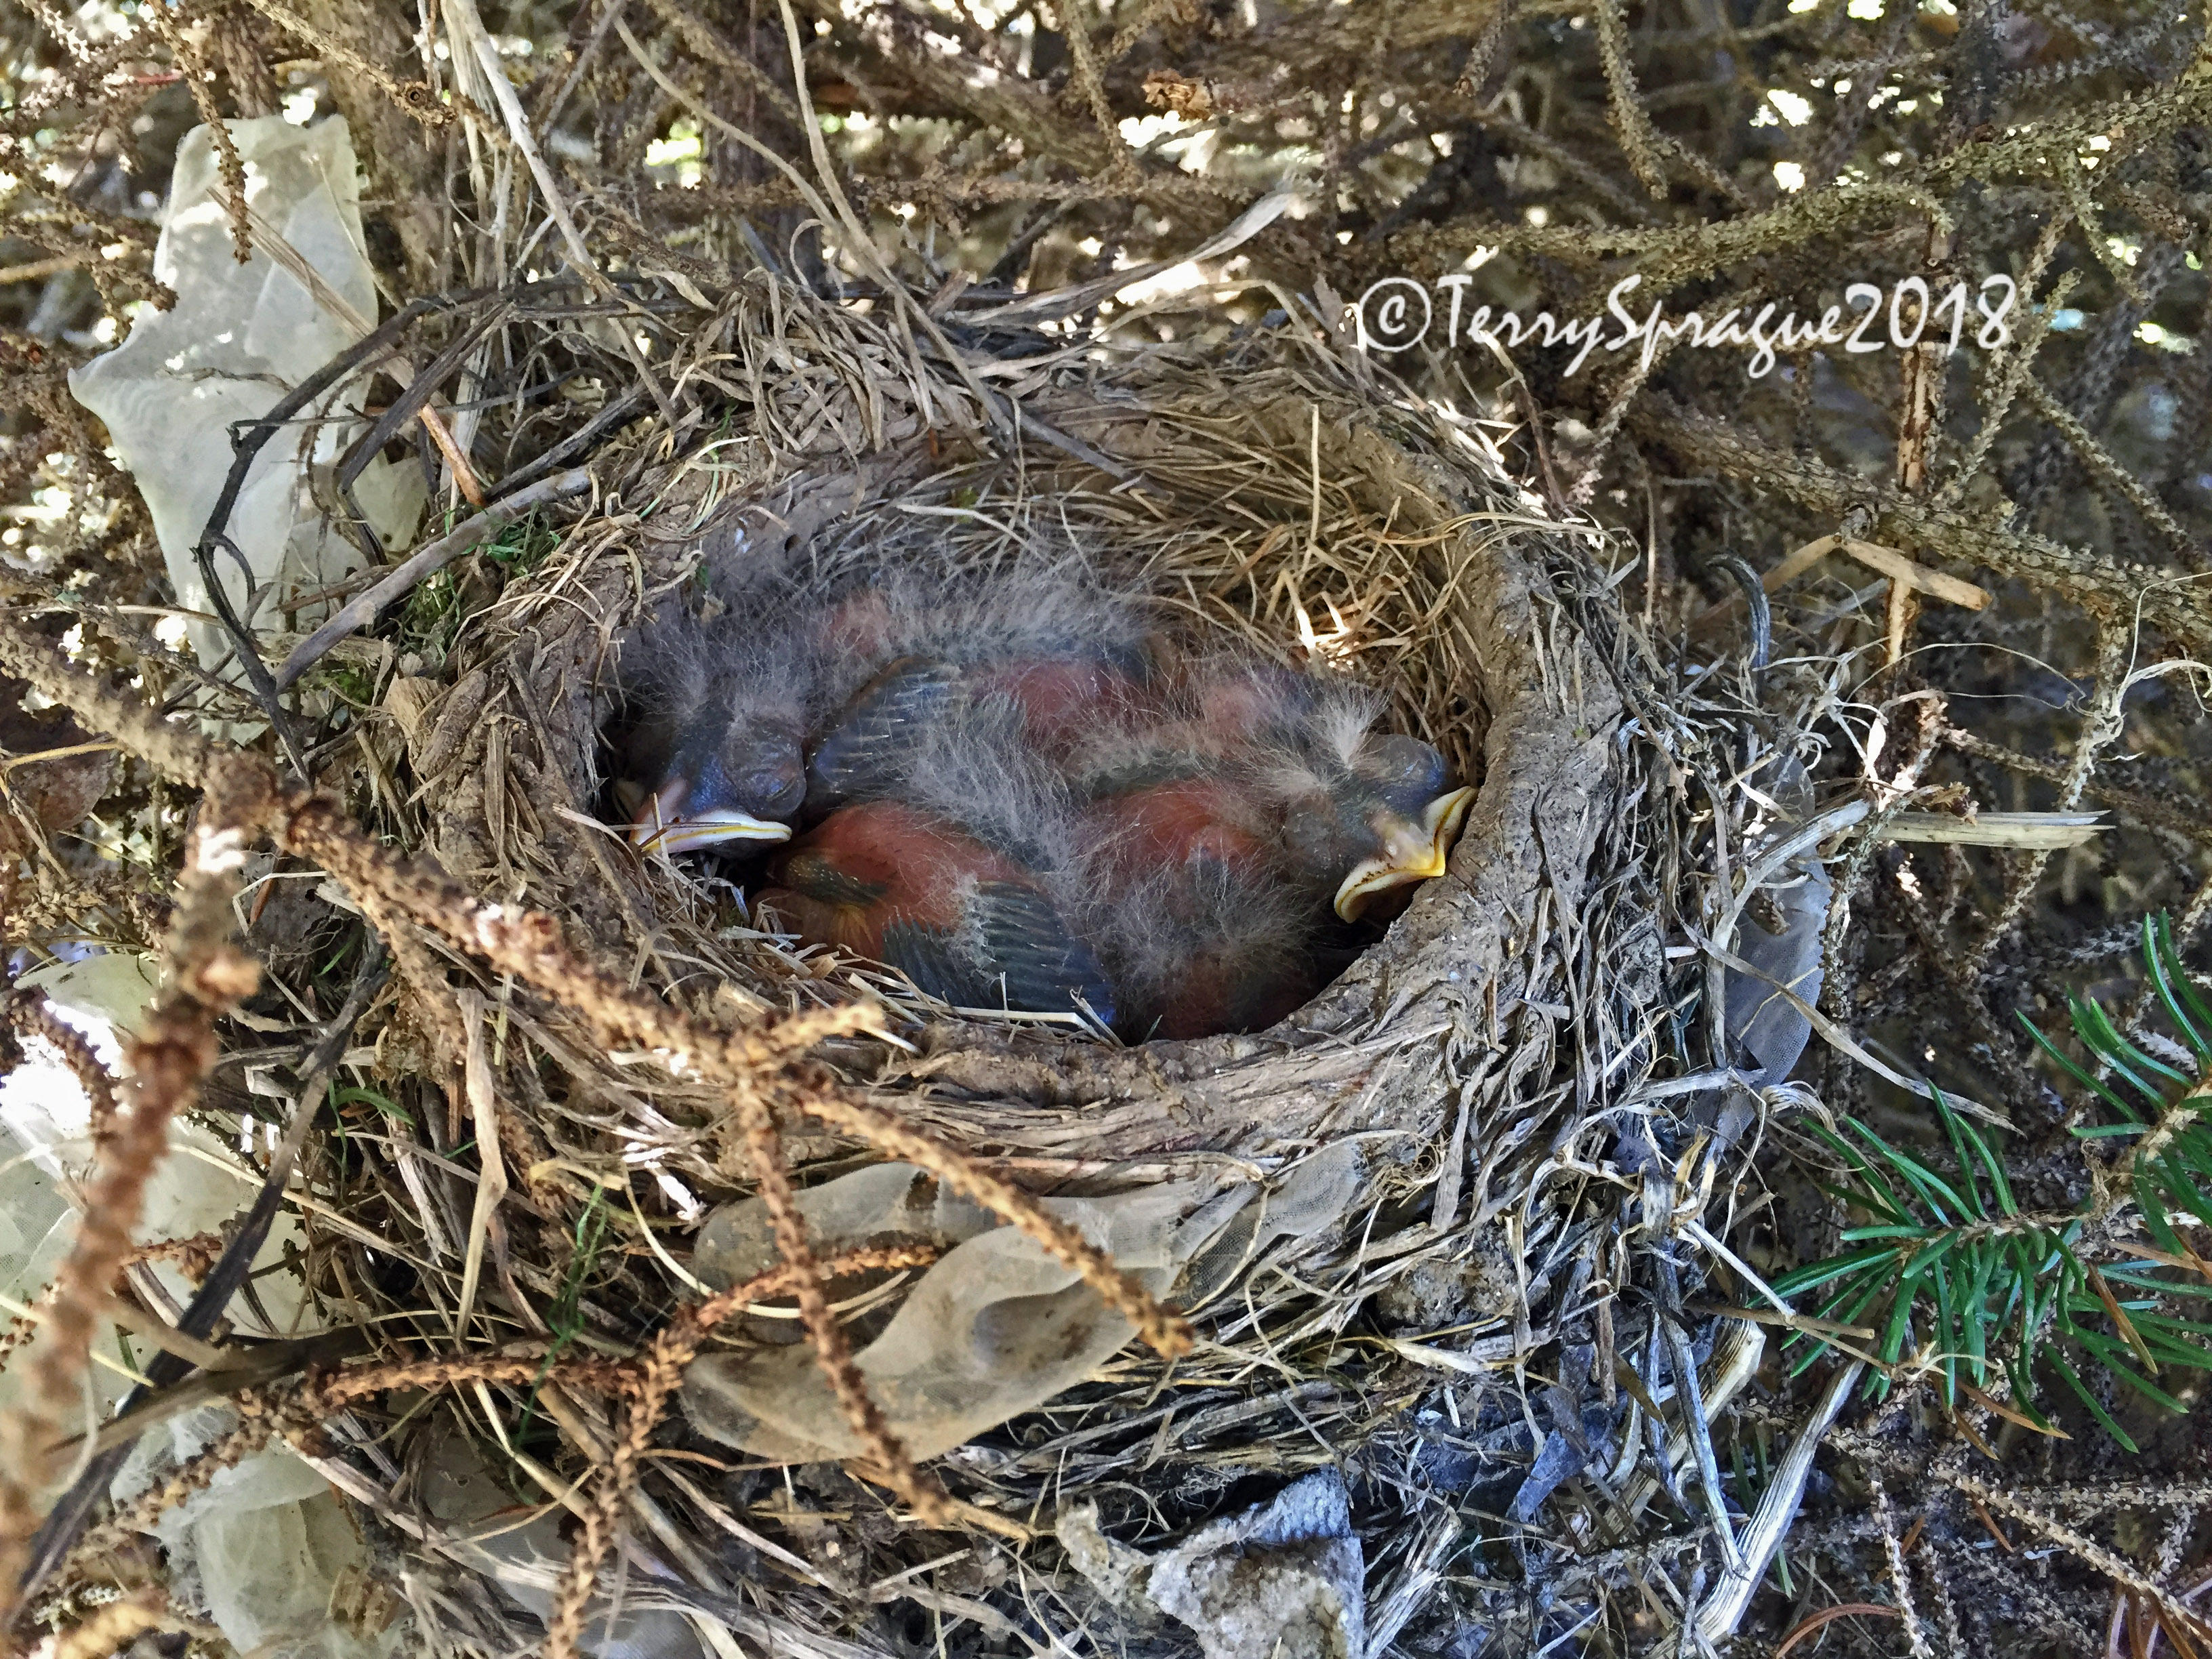 the robin babies are fuzzing up and filling the nest!